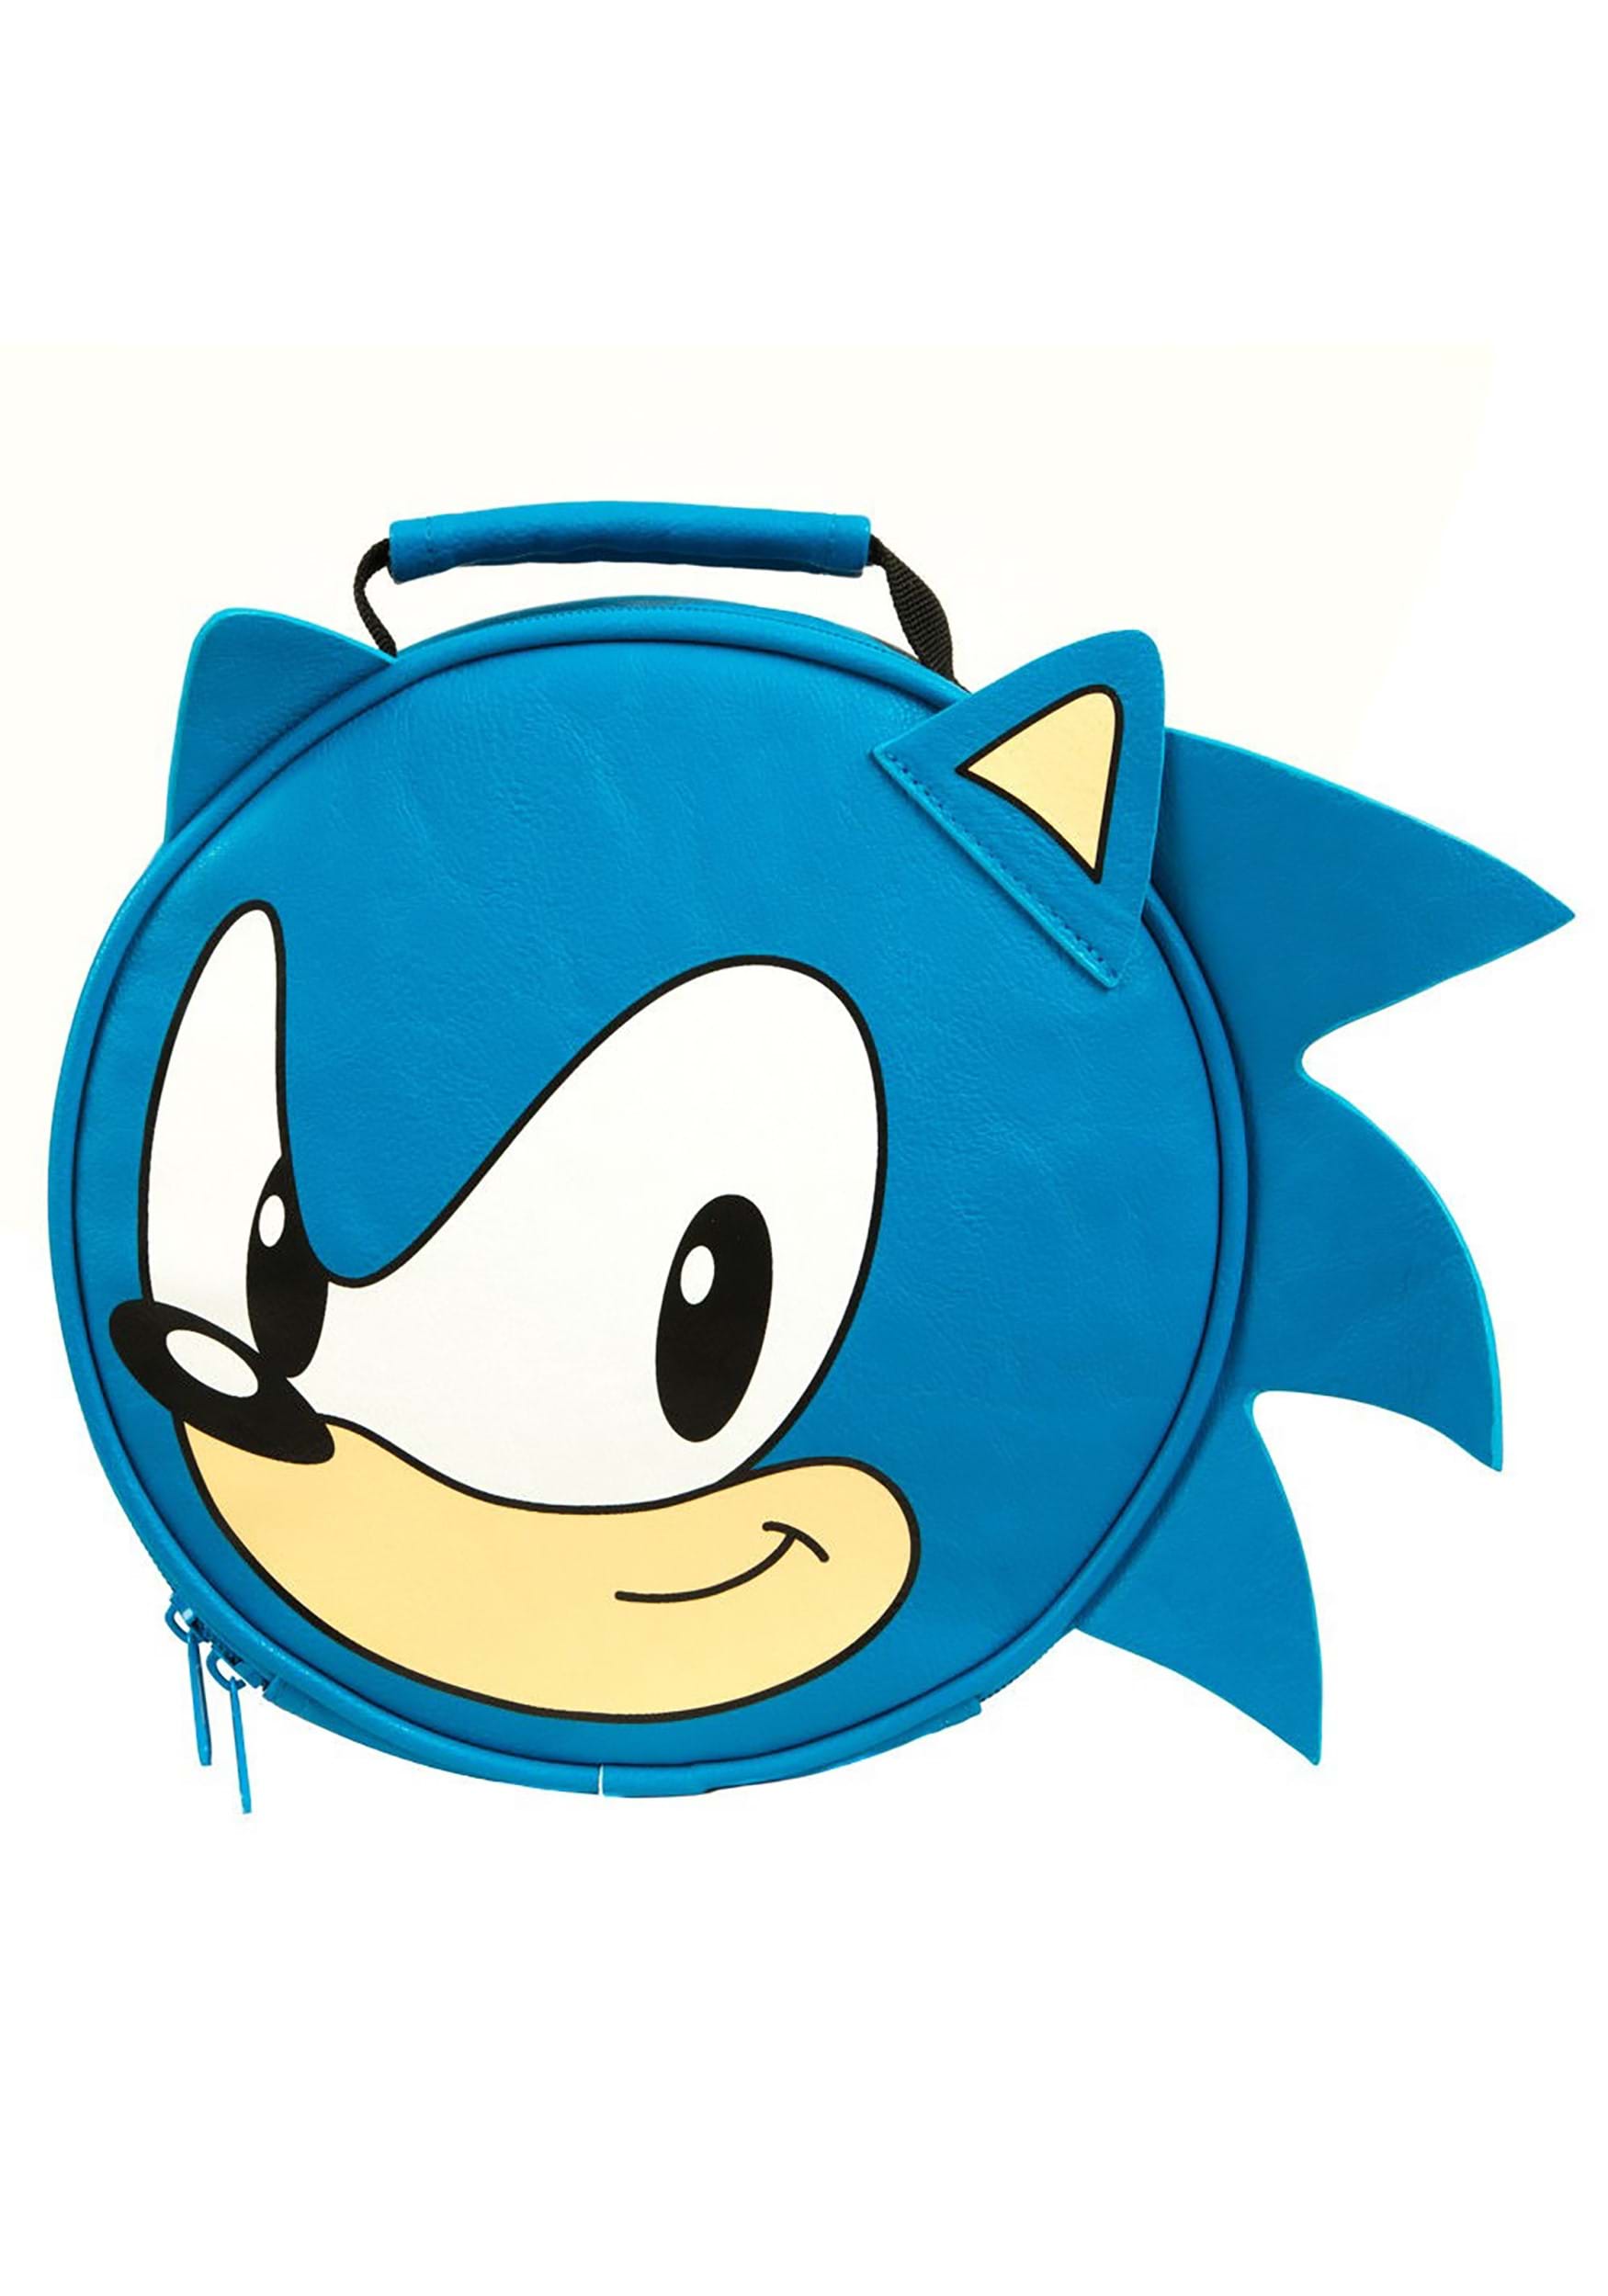 https://images.fun.com/products/77855/1-1/sonic-the-hedgehog-insulated-lunch-box.jpg